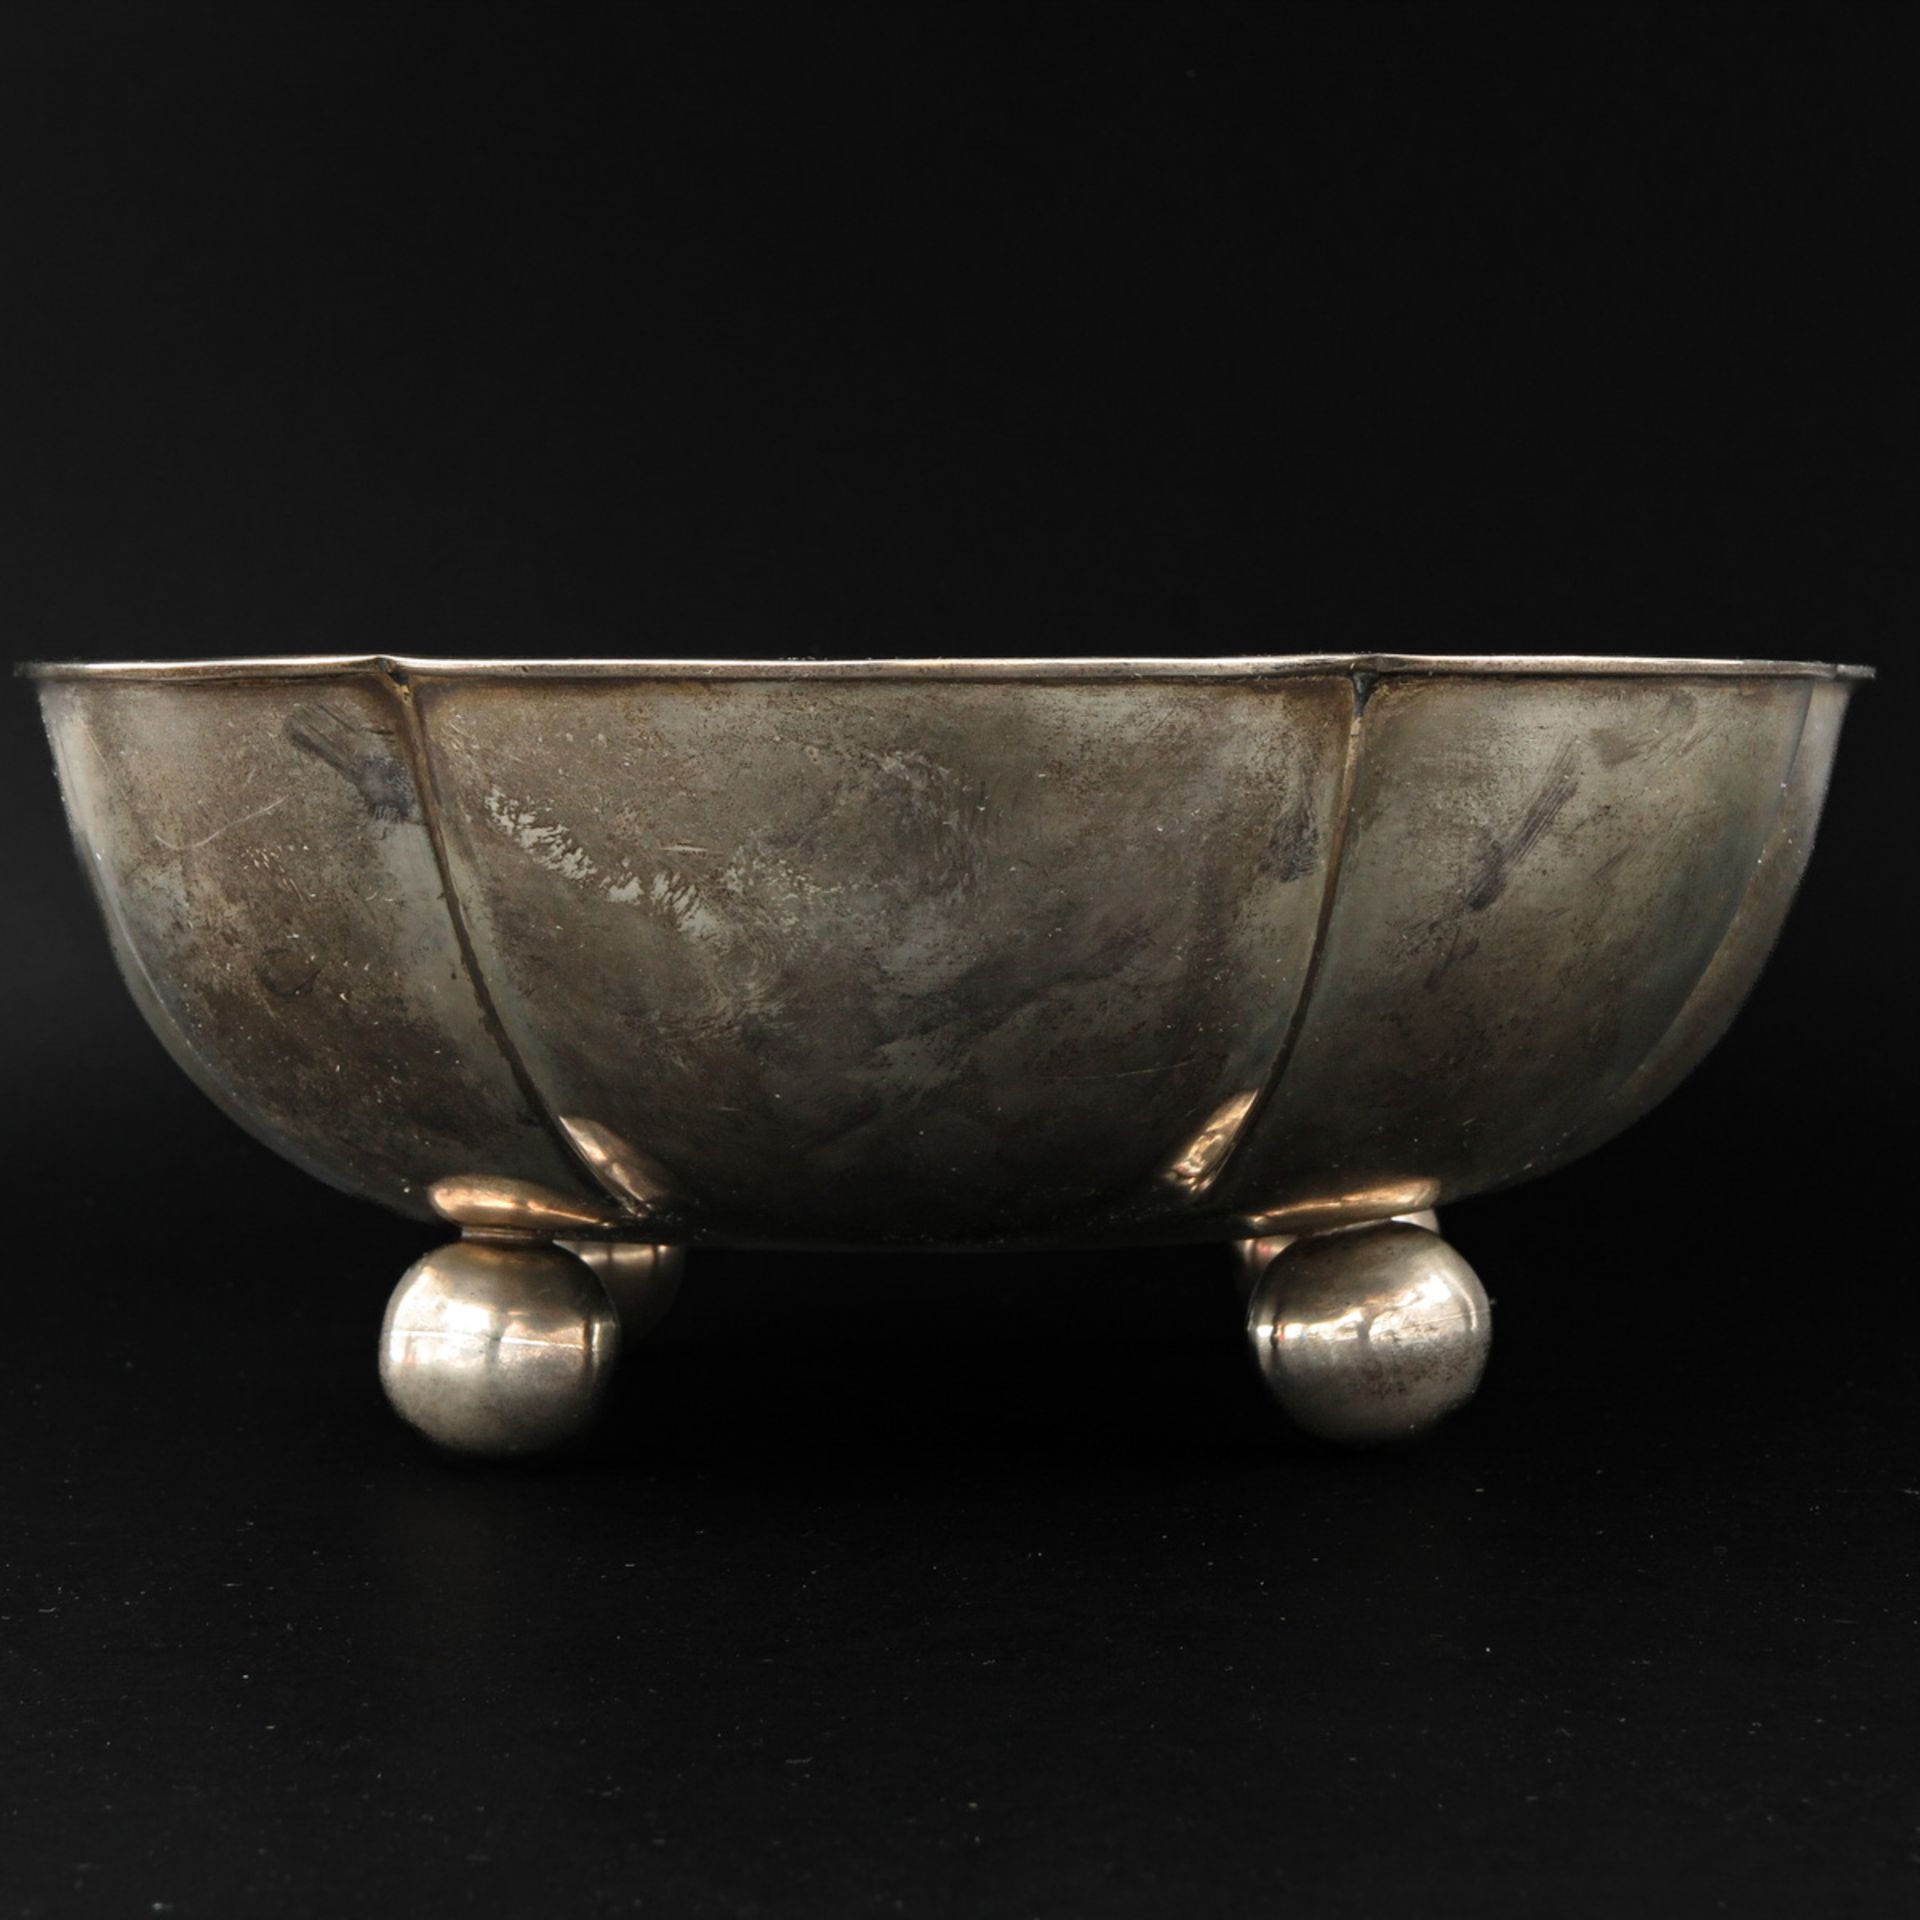 A Mexican Silver Dish - Image 2 of 7